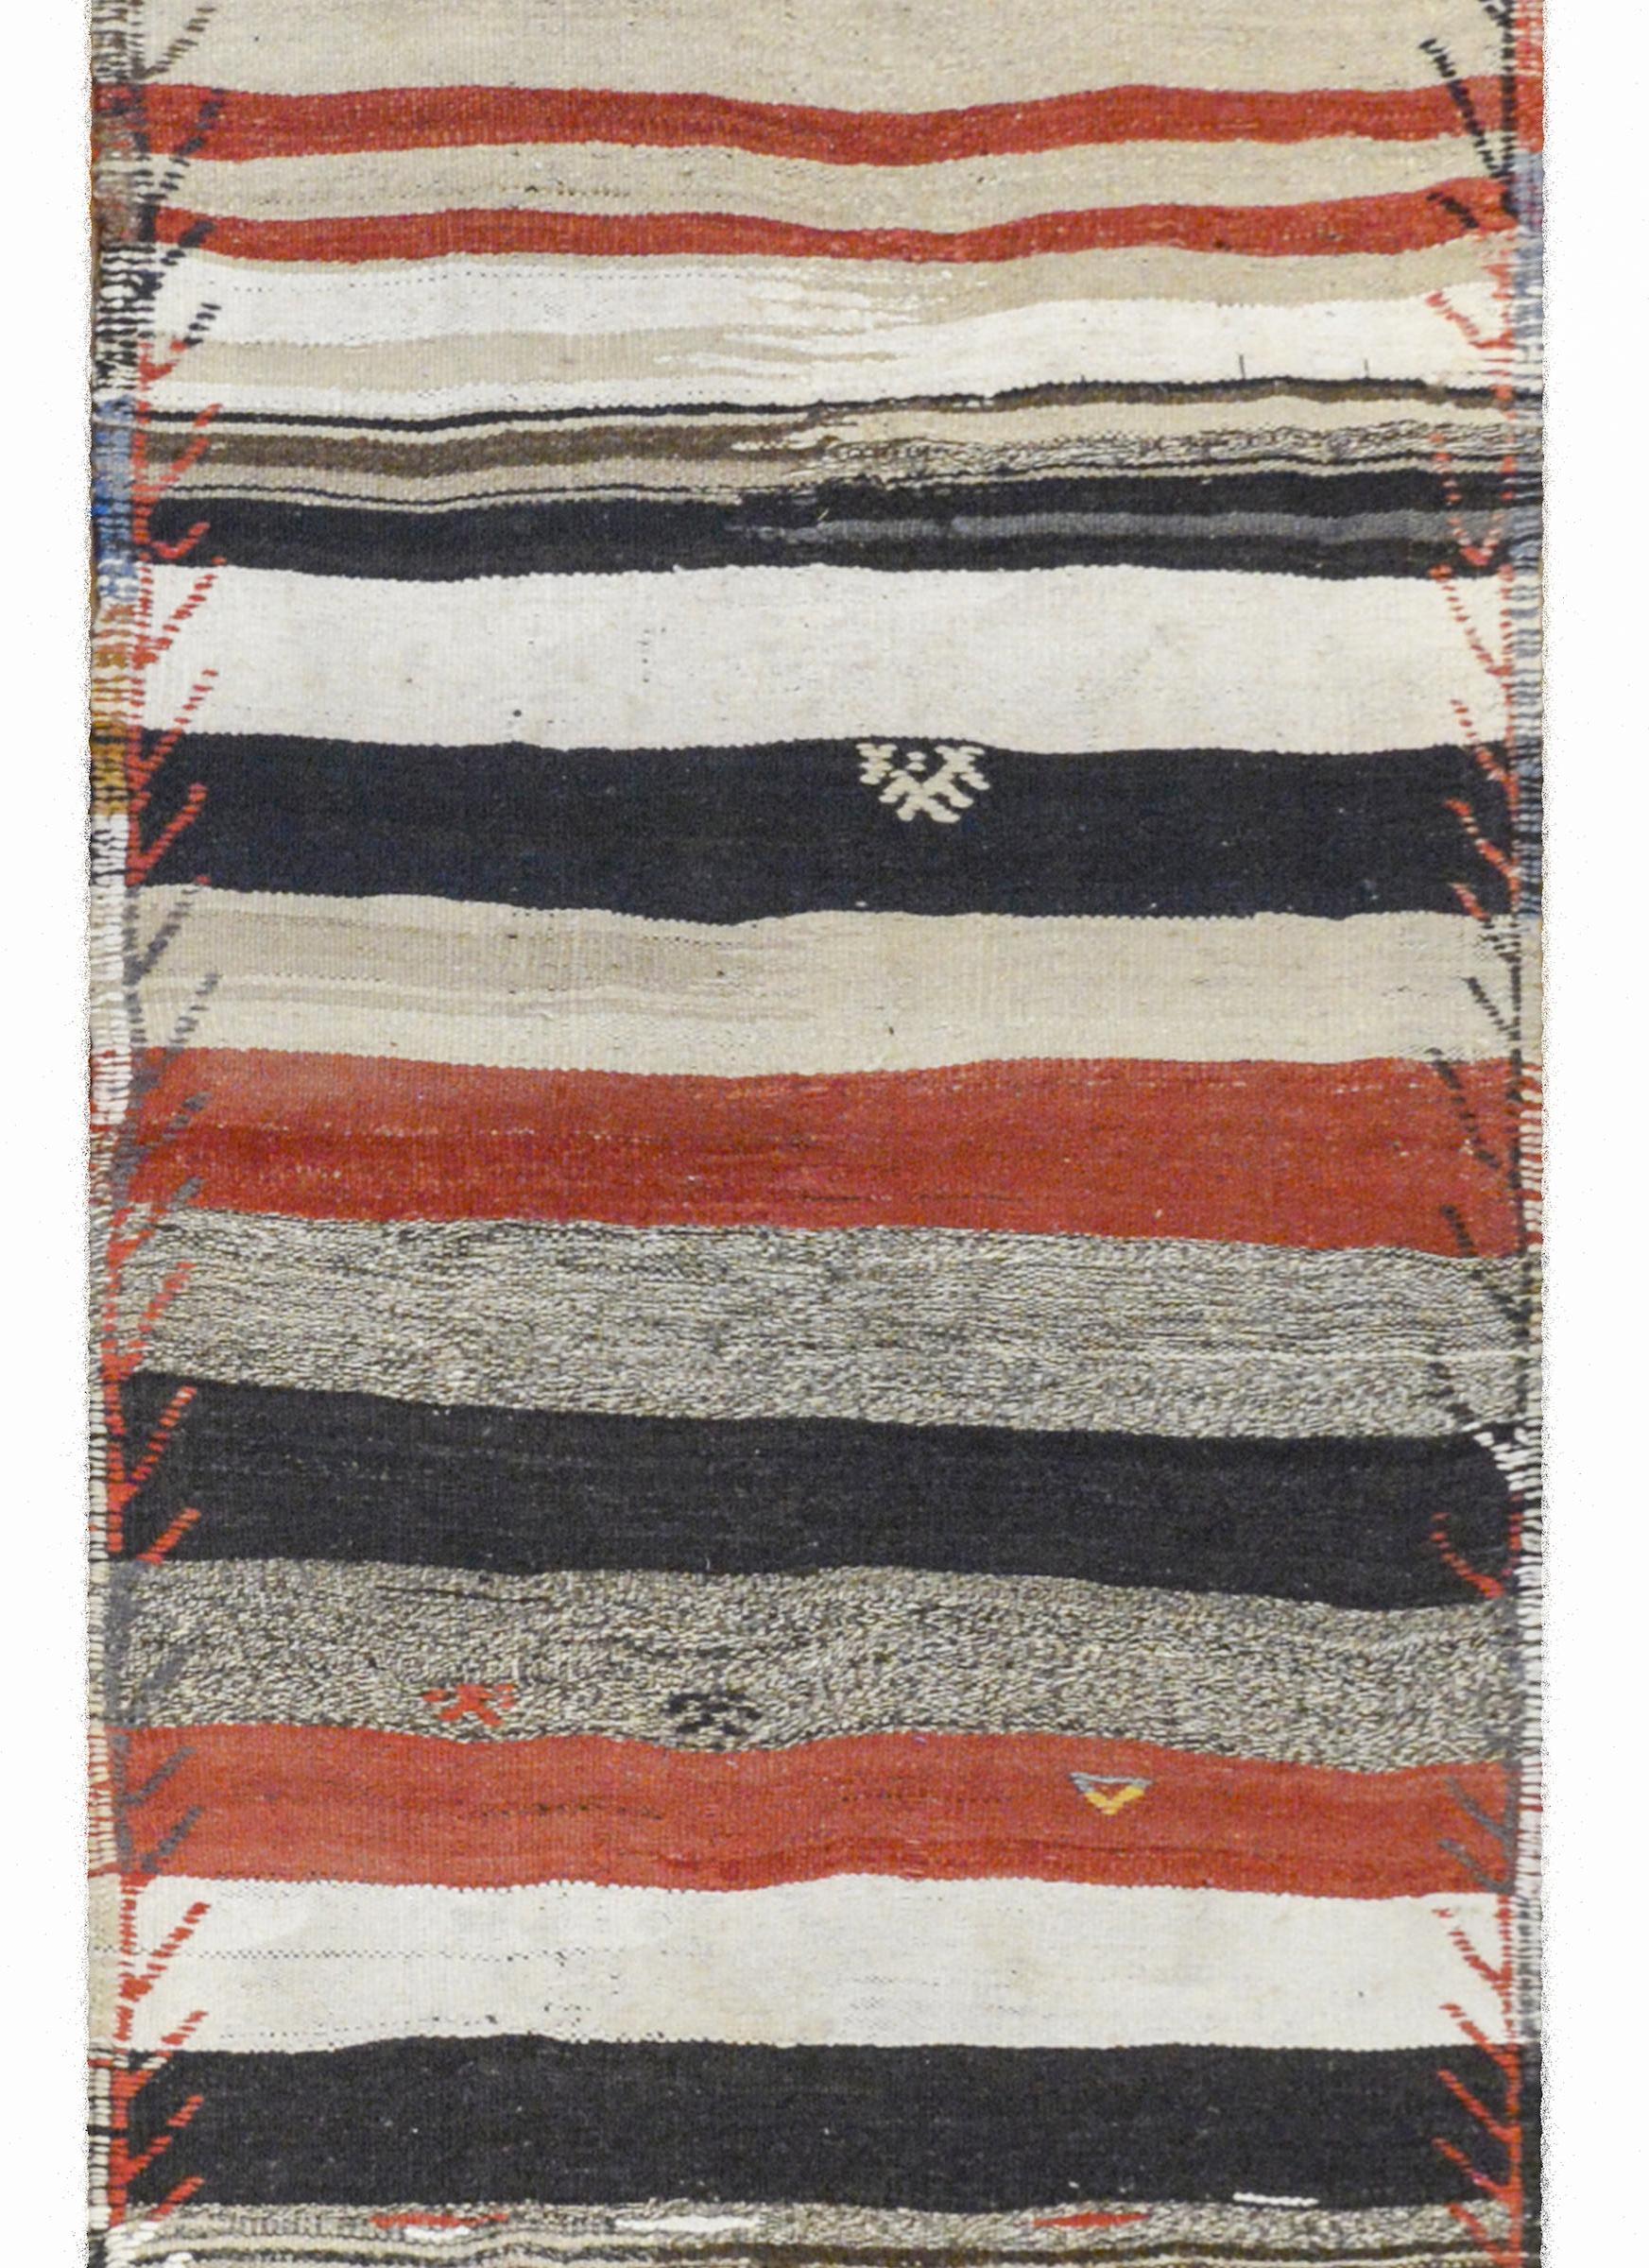 A fantastic mid-20th century Turkish Konya Kilim runner with alternating crimson, black, white, and gray stripes with embroidered stylized flowers and an embroidered border.